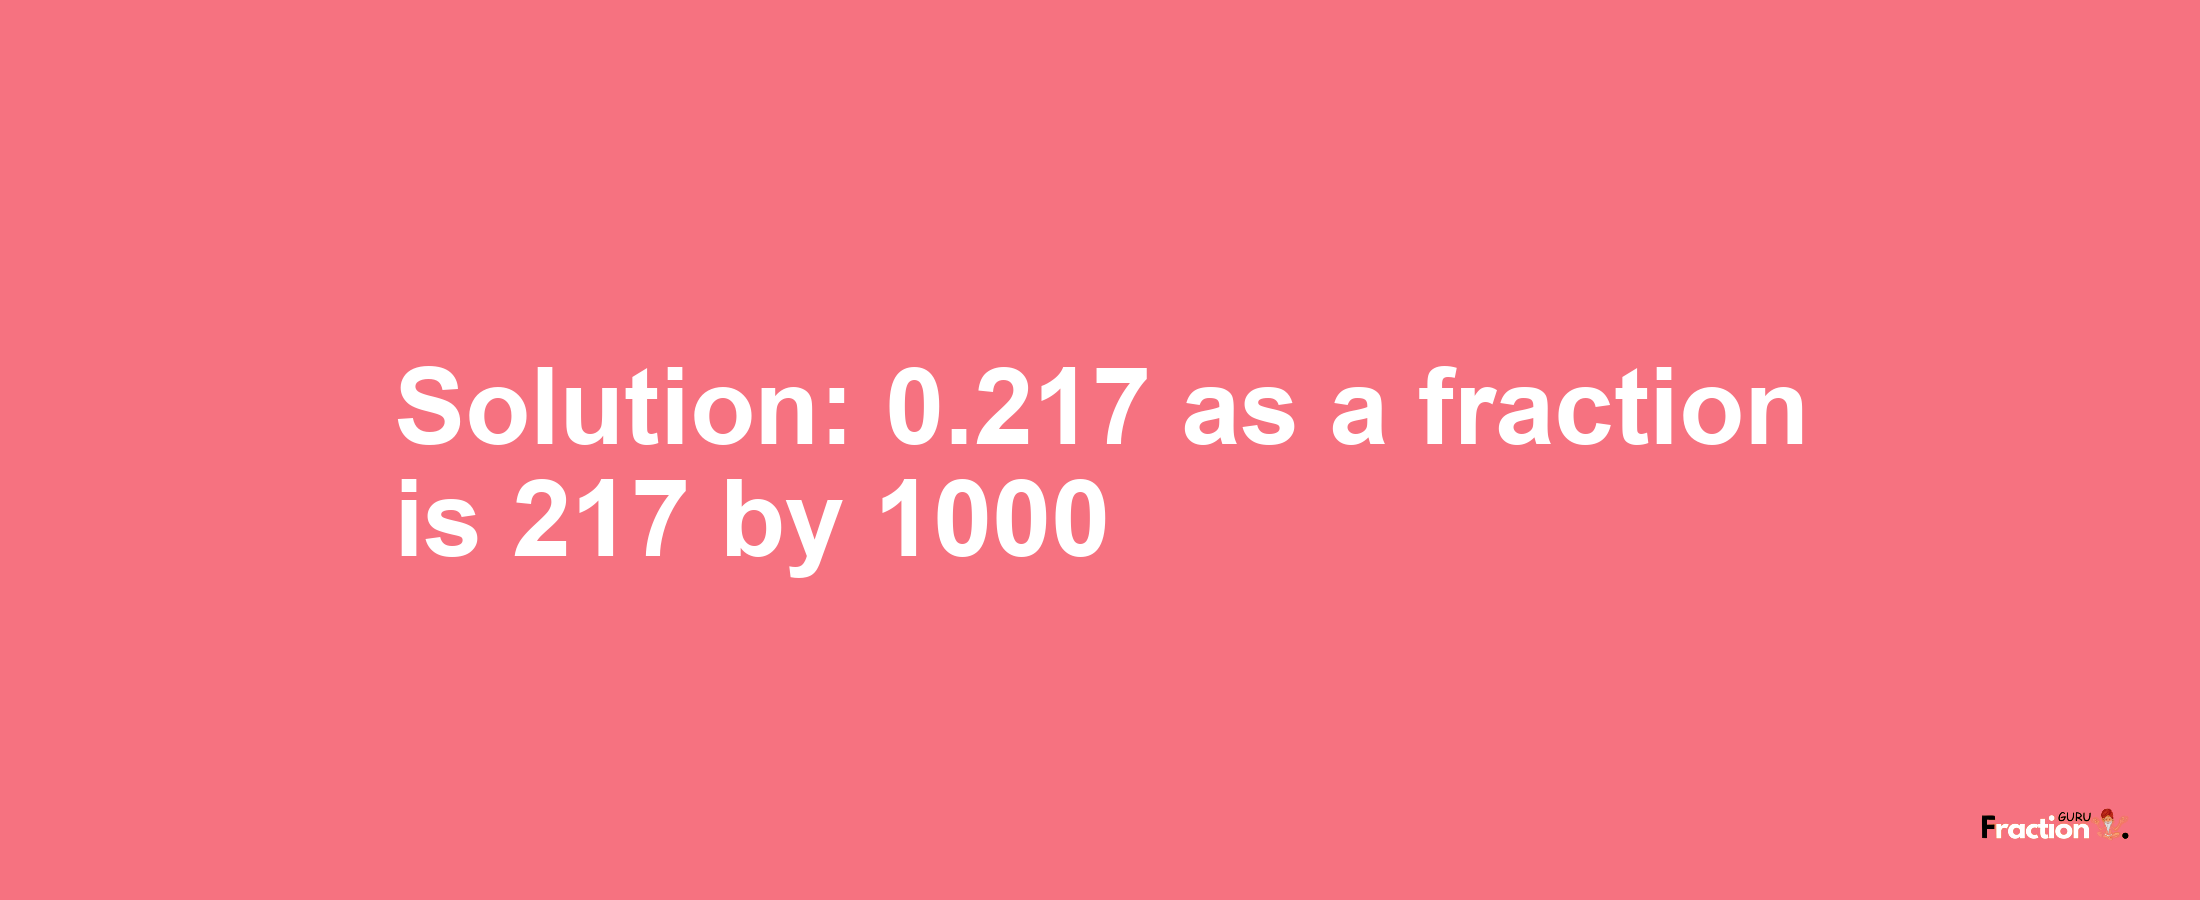 Solution:0.217 as a fraction is 217/1000